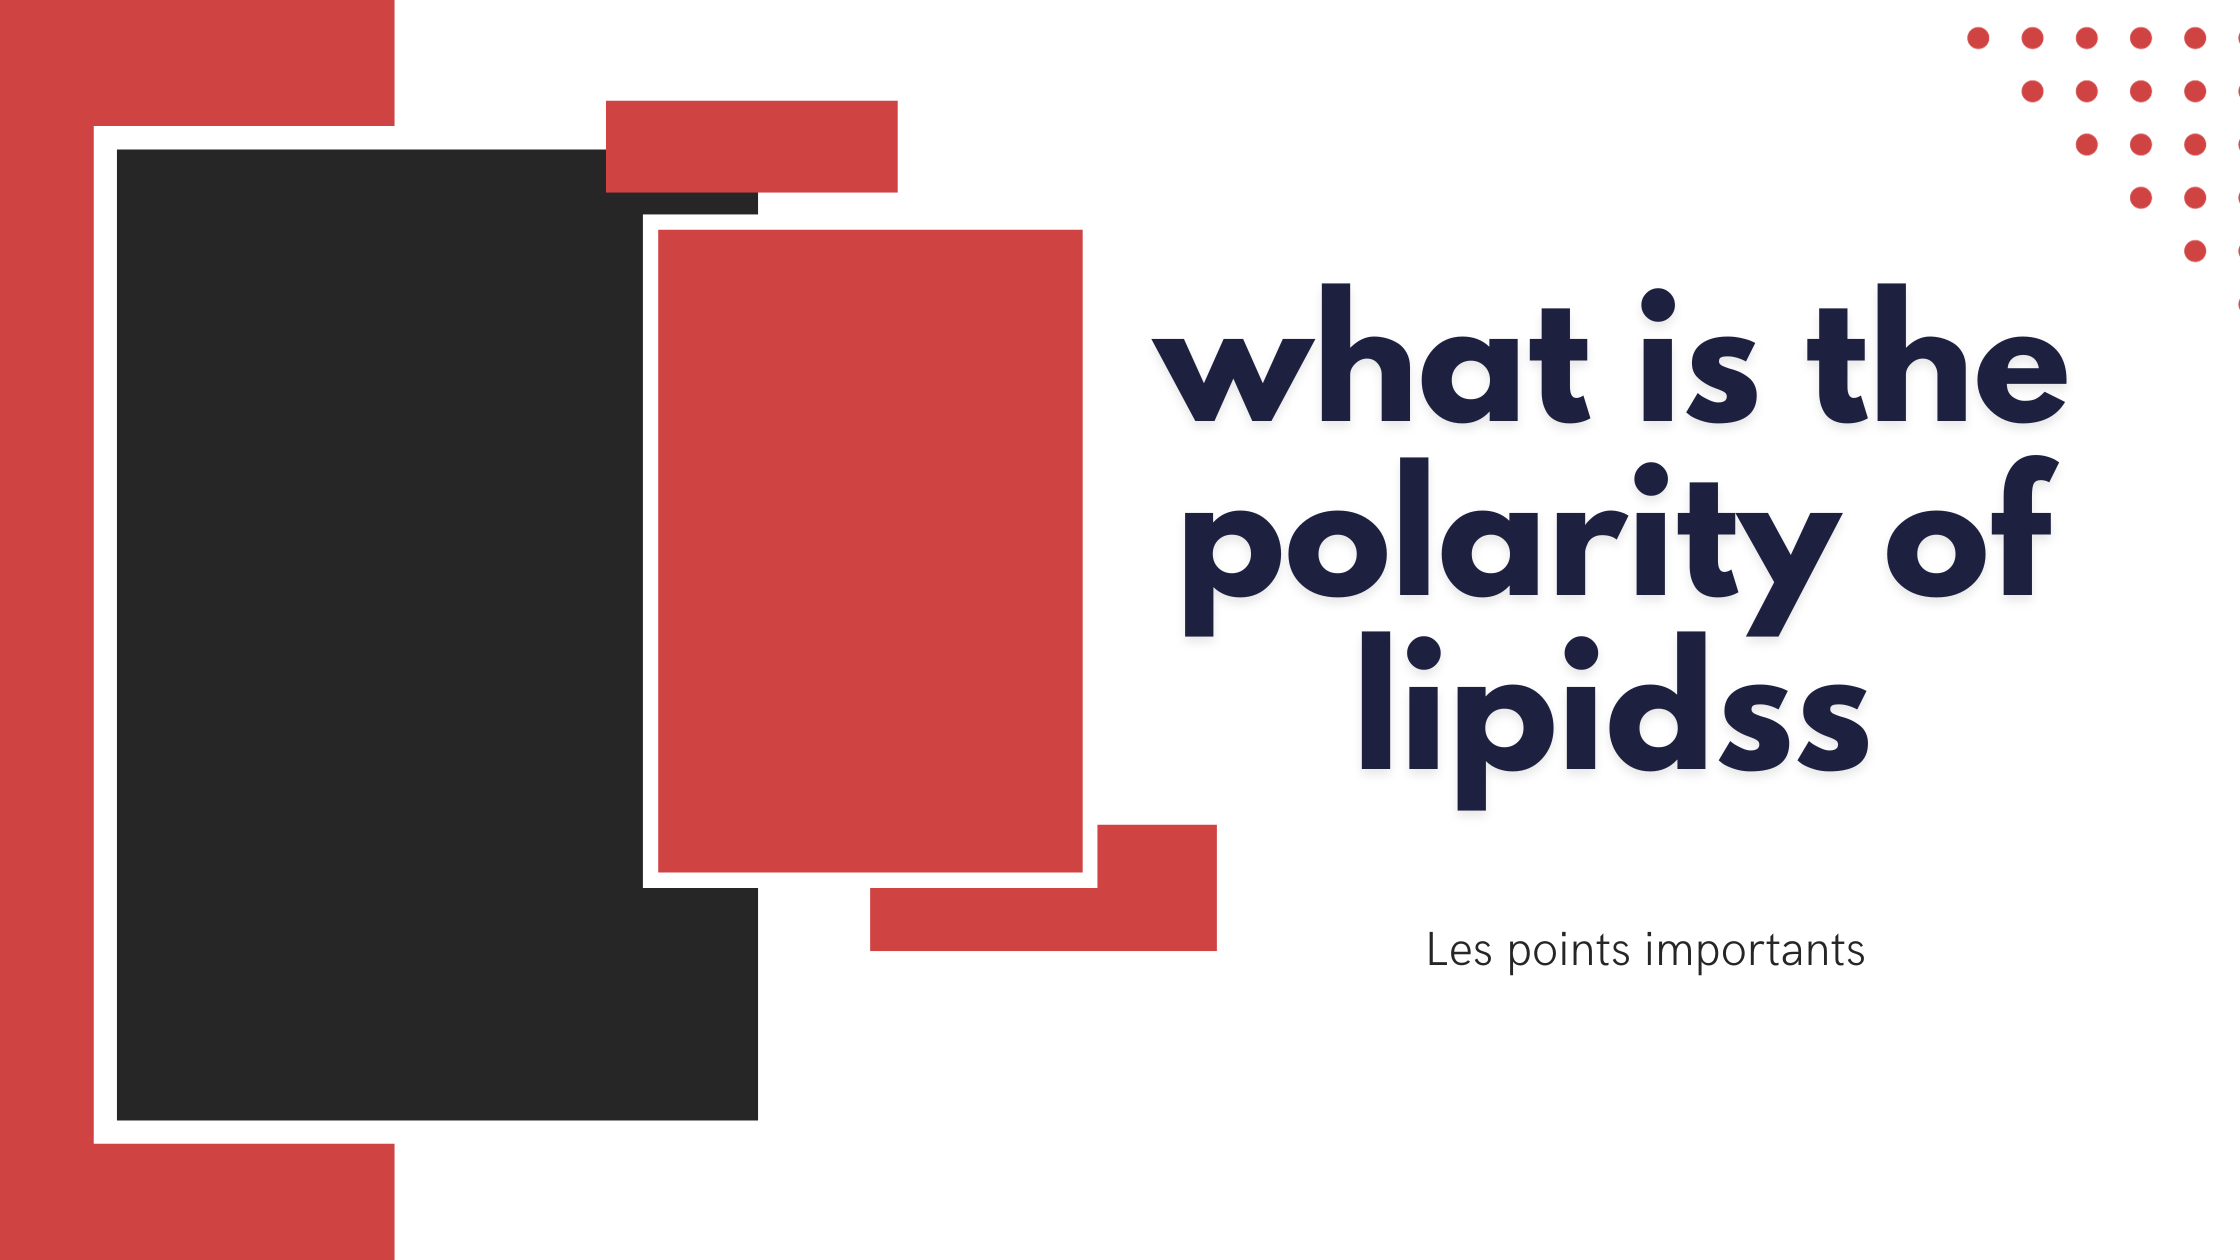 what is the polarity of lipids | Les points importants